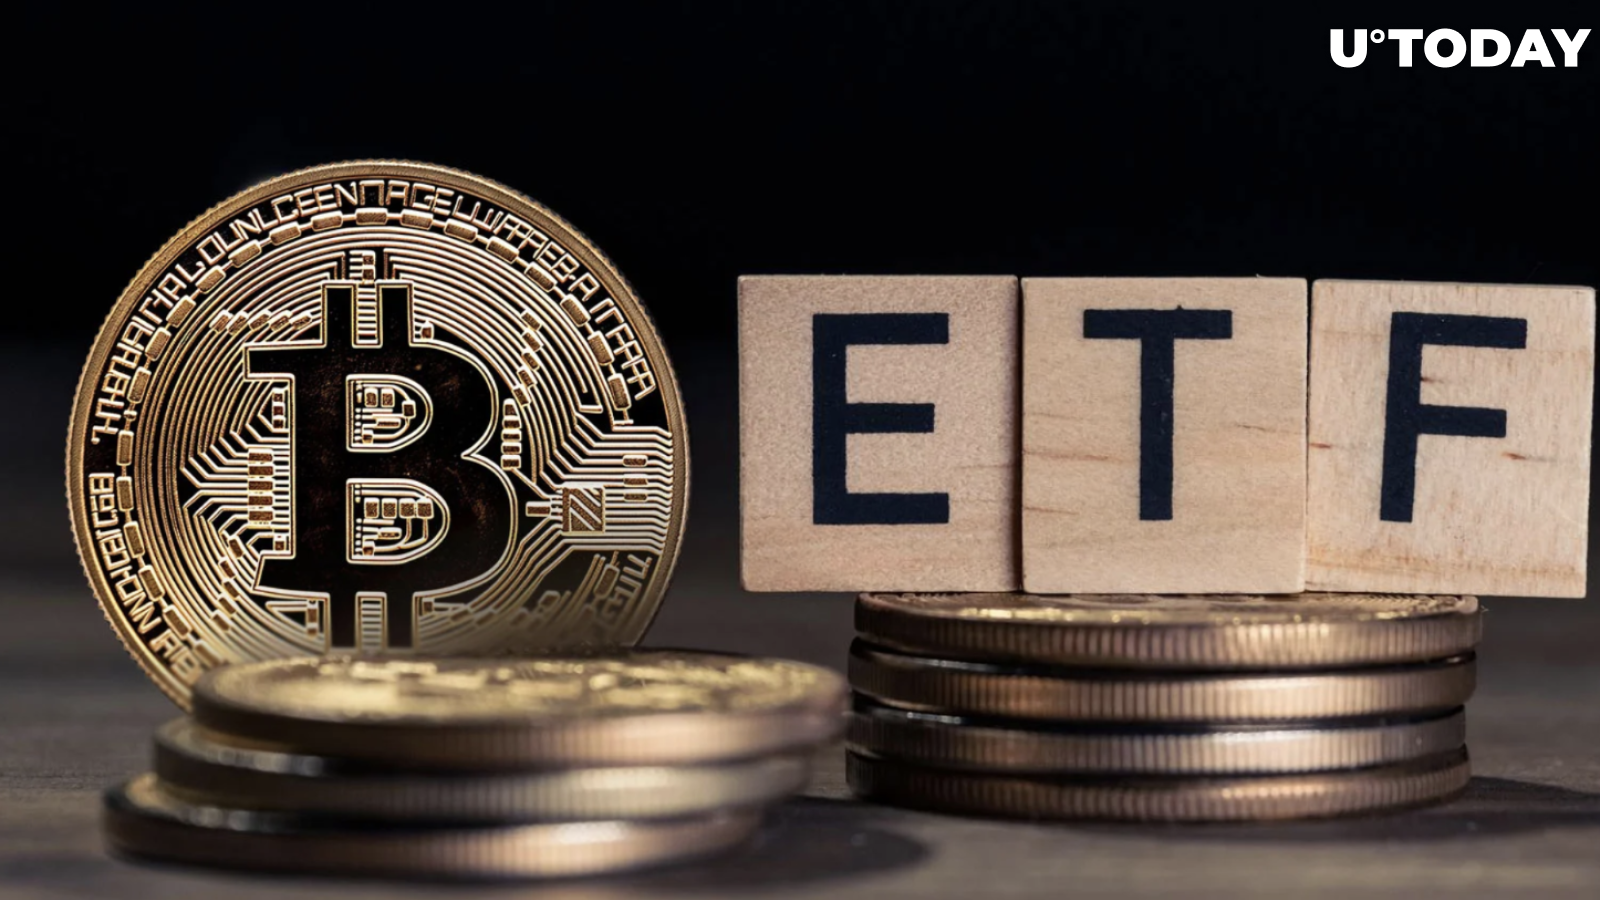 Bitcoin ETFs to Obliterate Records, Expert Says